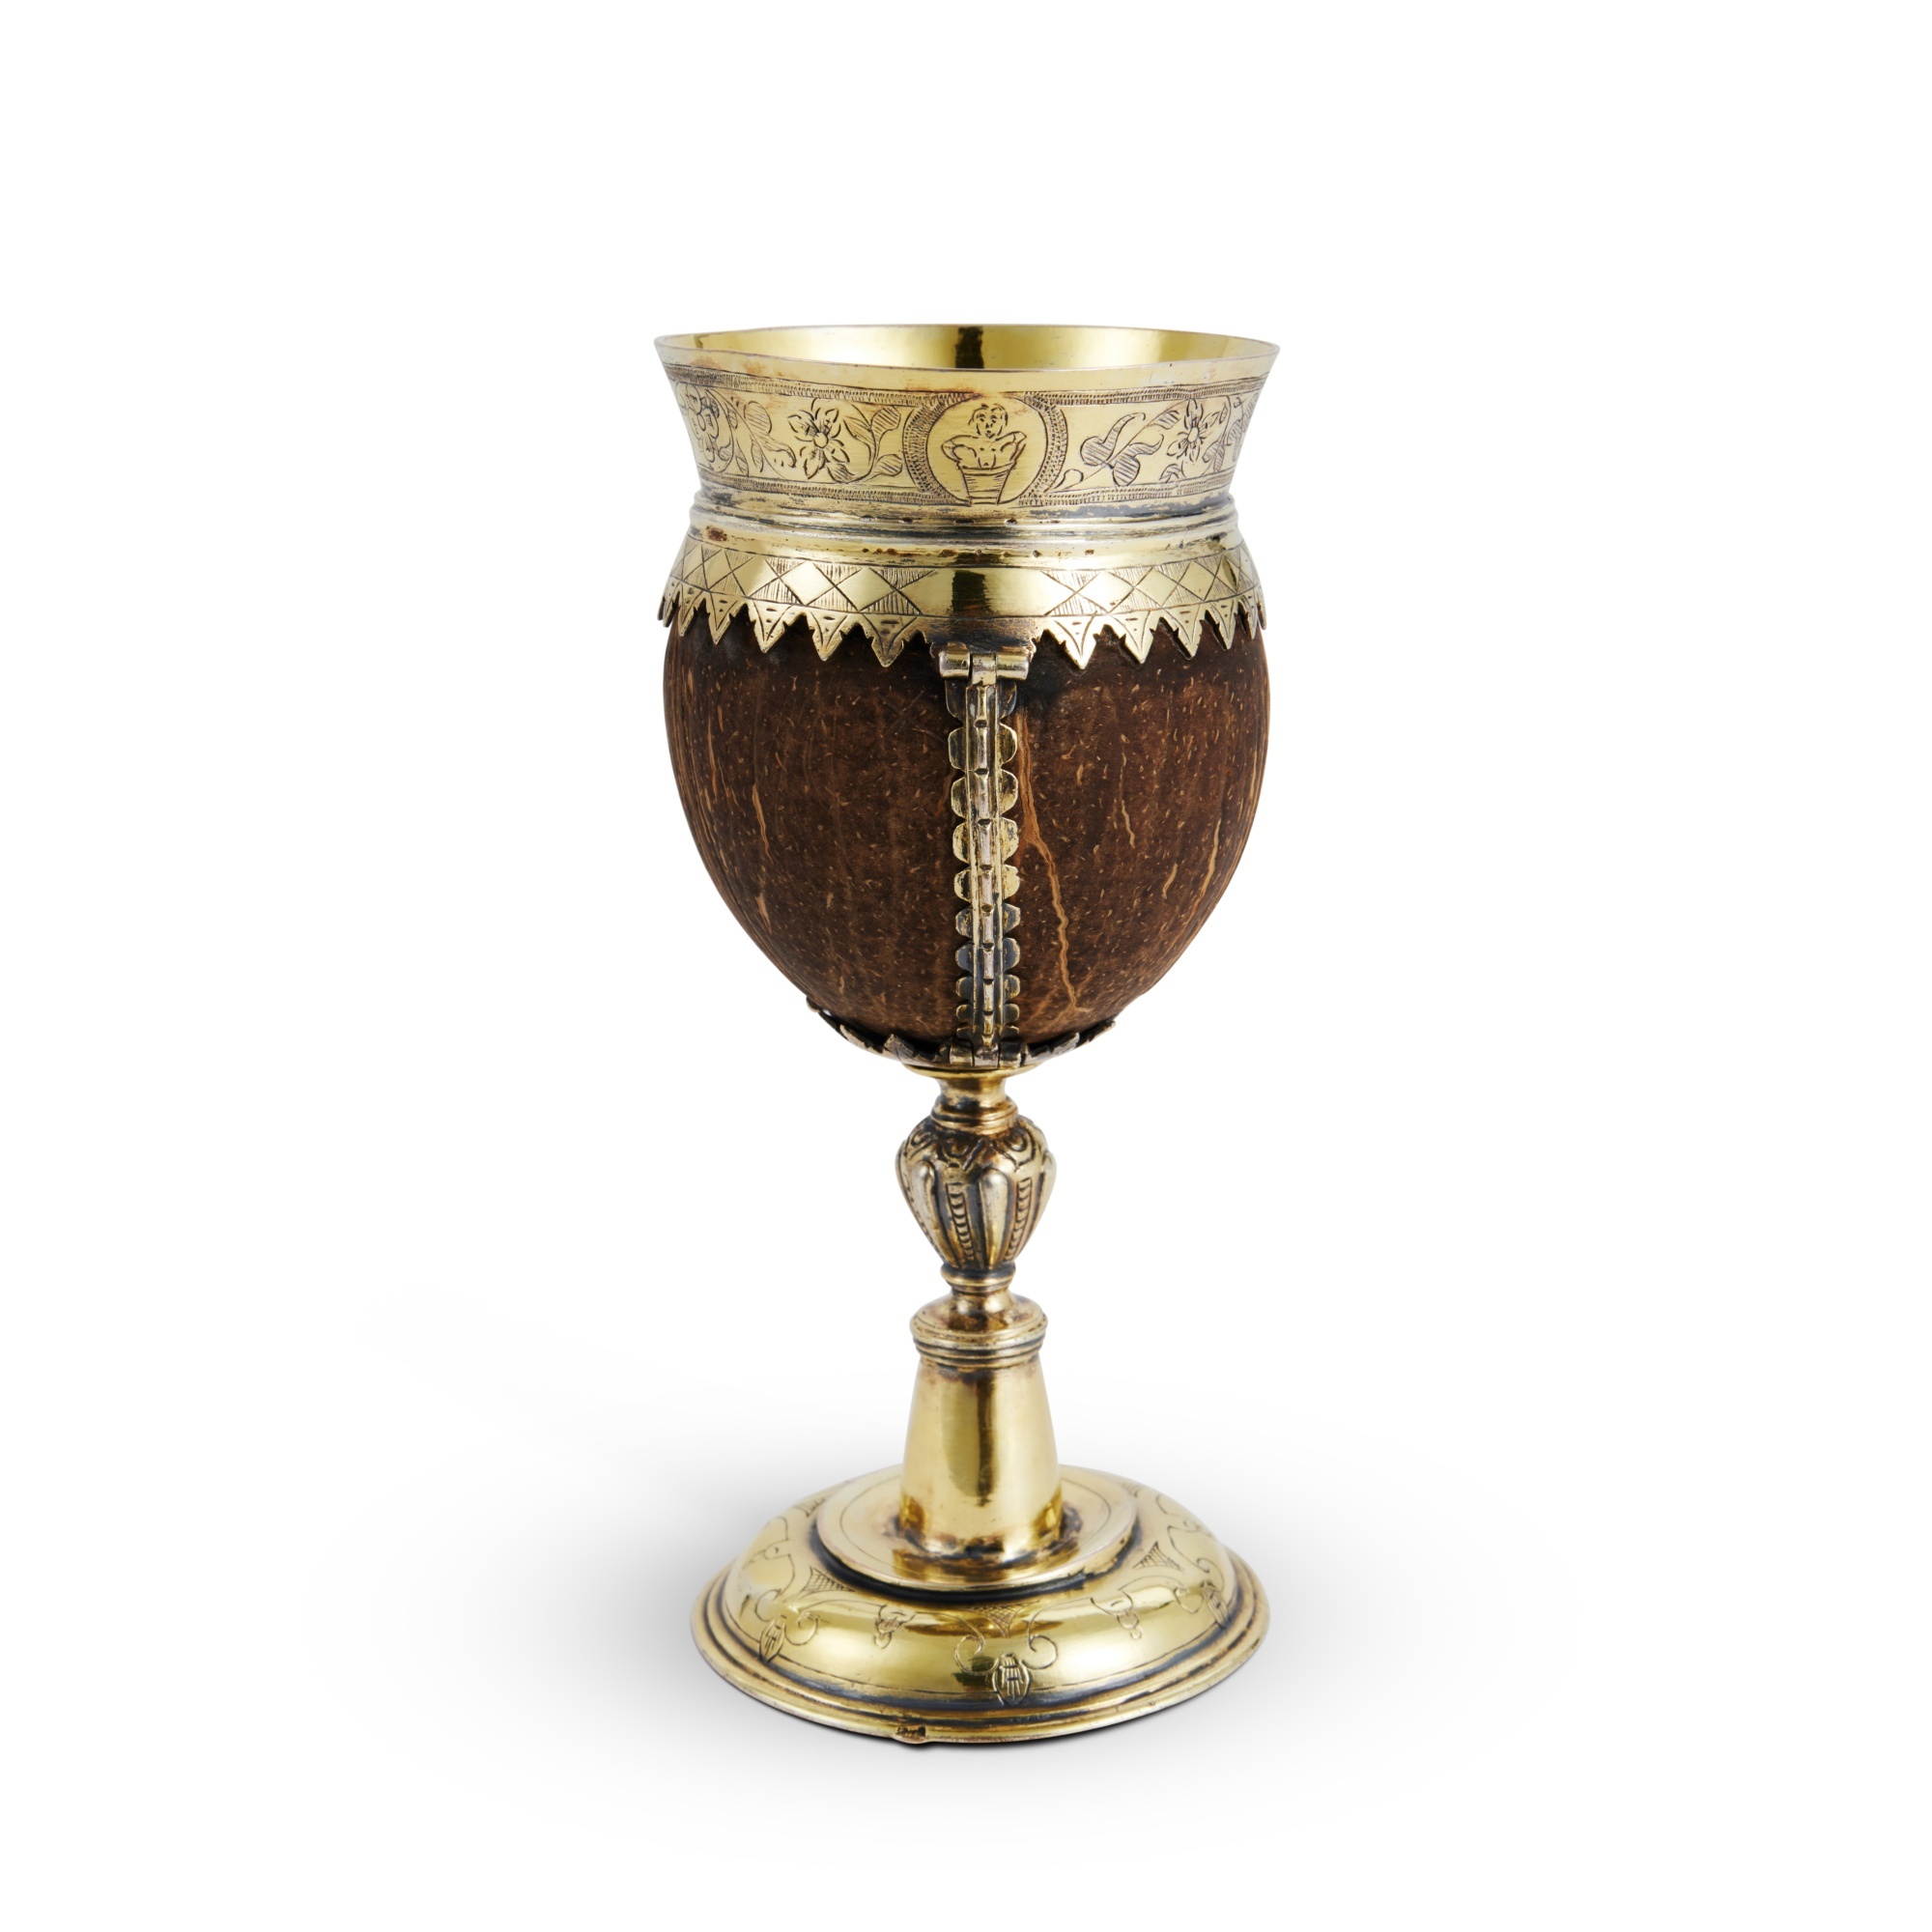 A Silver-Gilt-Mounted Coconut Cup, Probably German, Early 17th Century - Image 3 of 4